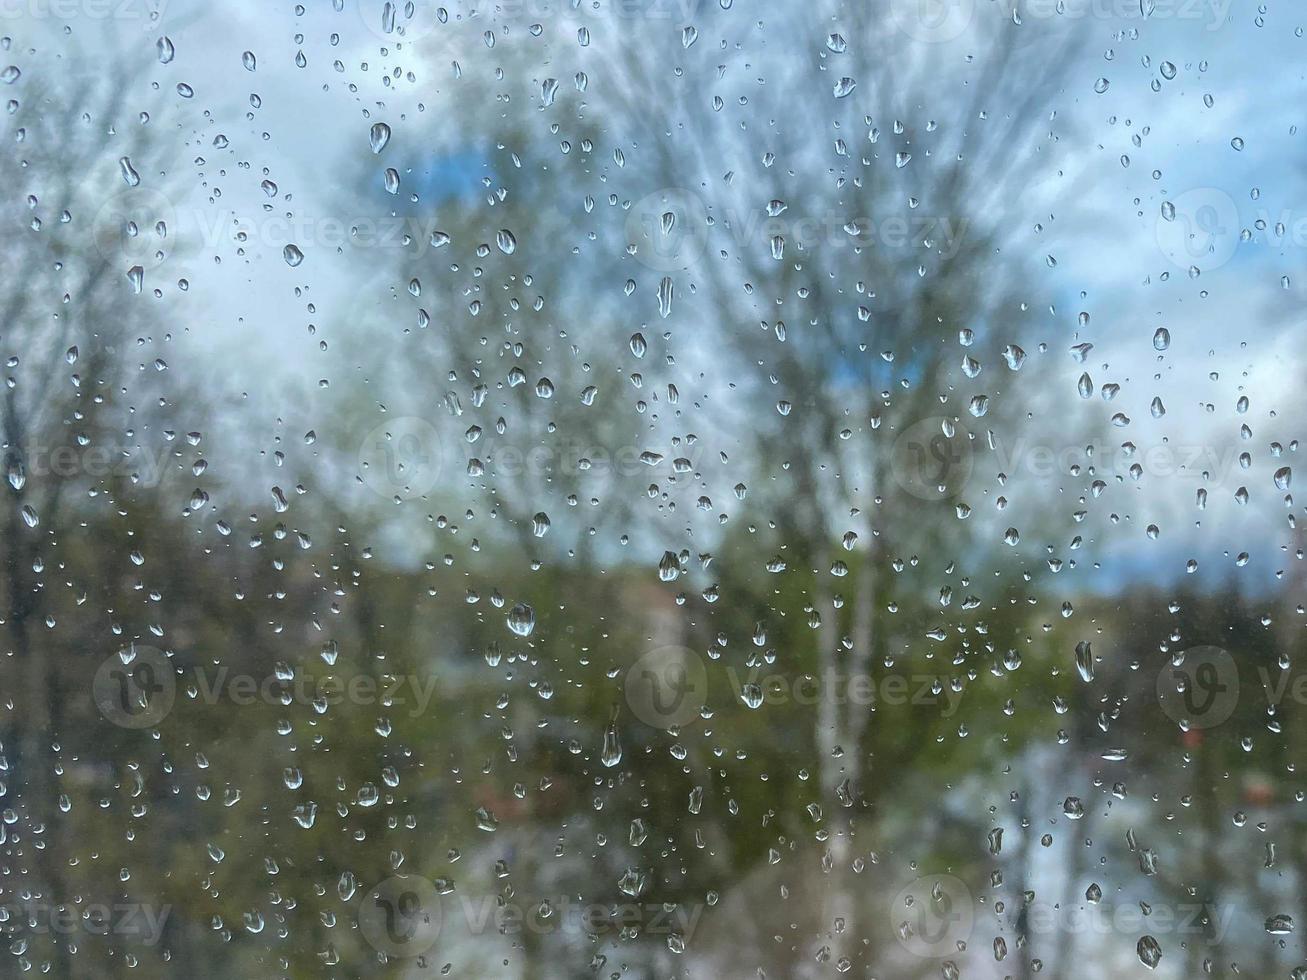 Beautiful surface texture of wet transparent glass in a window with clean cold drops after rain. The background photo